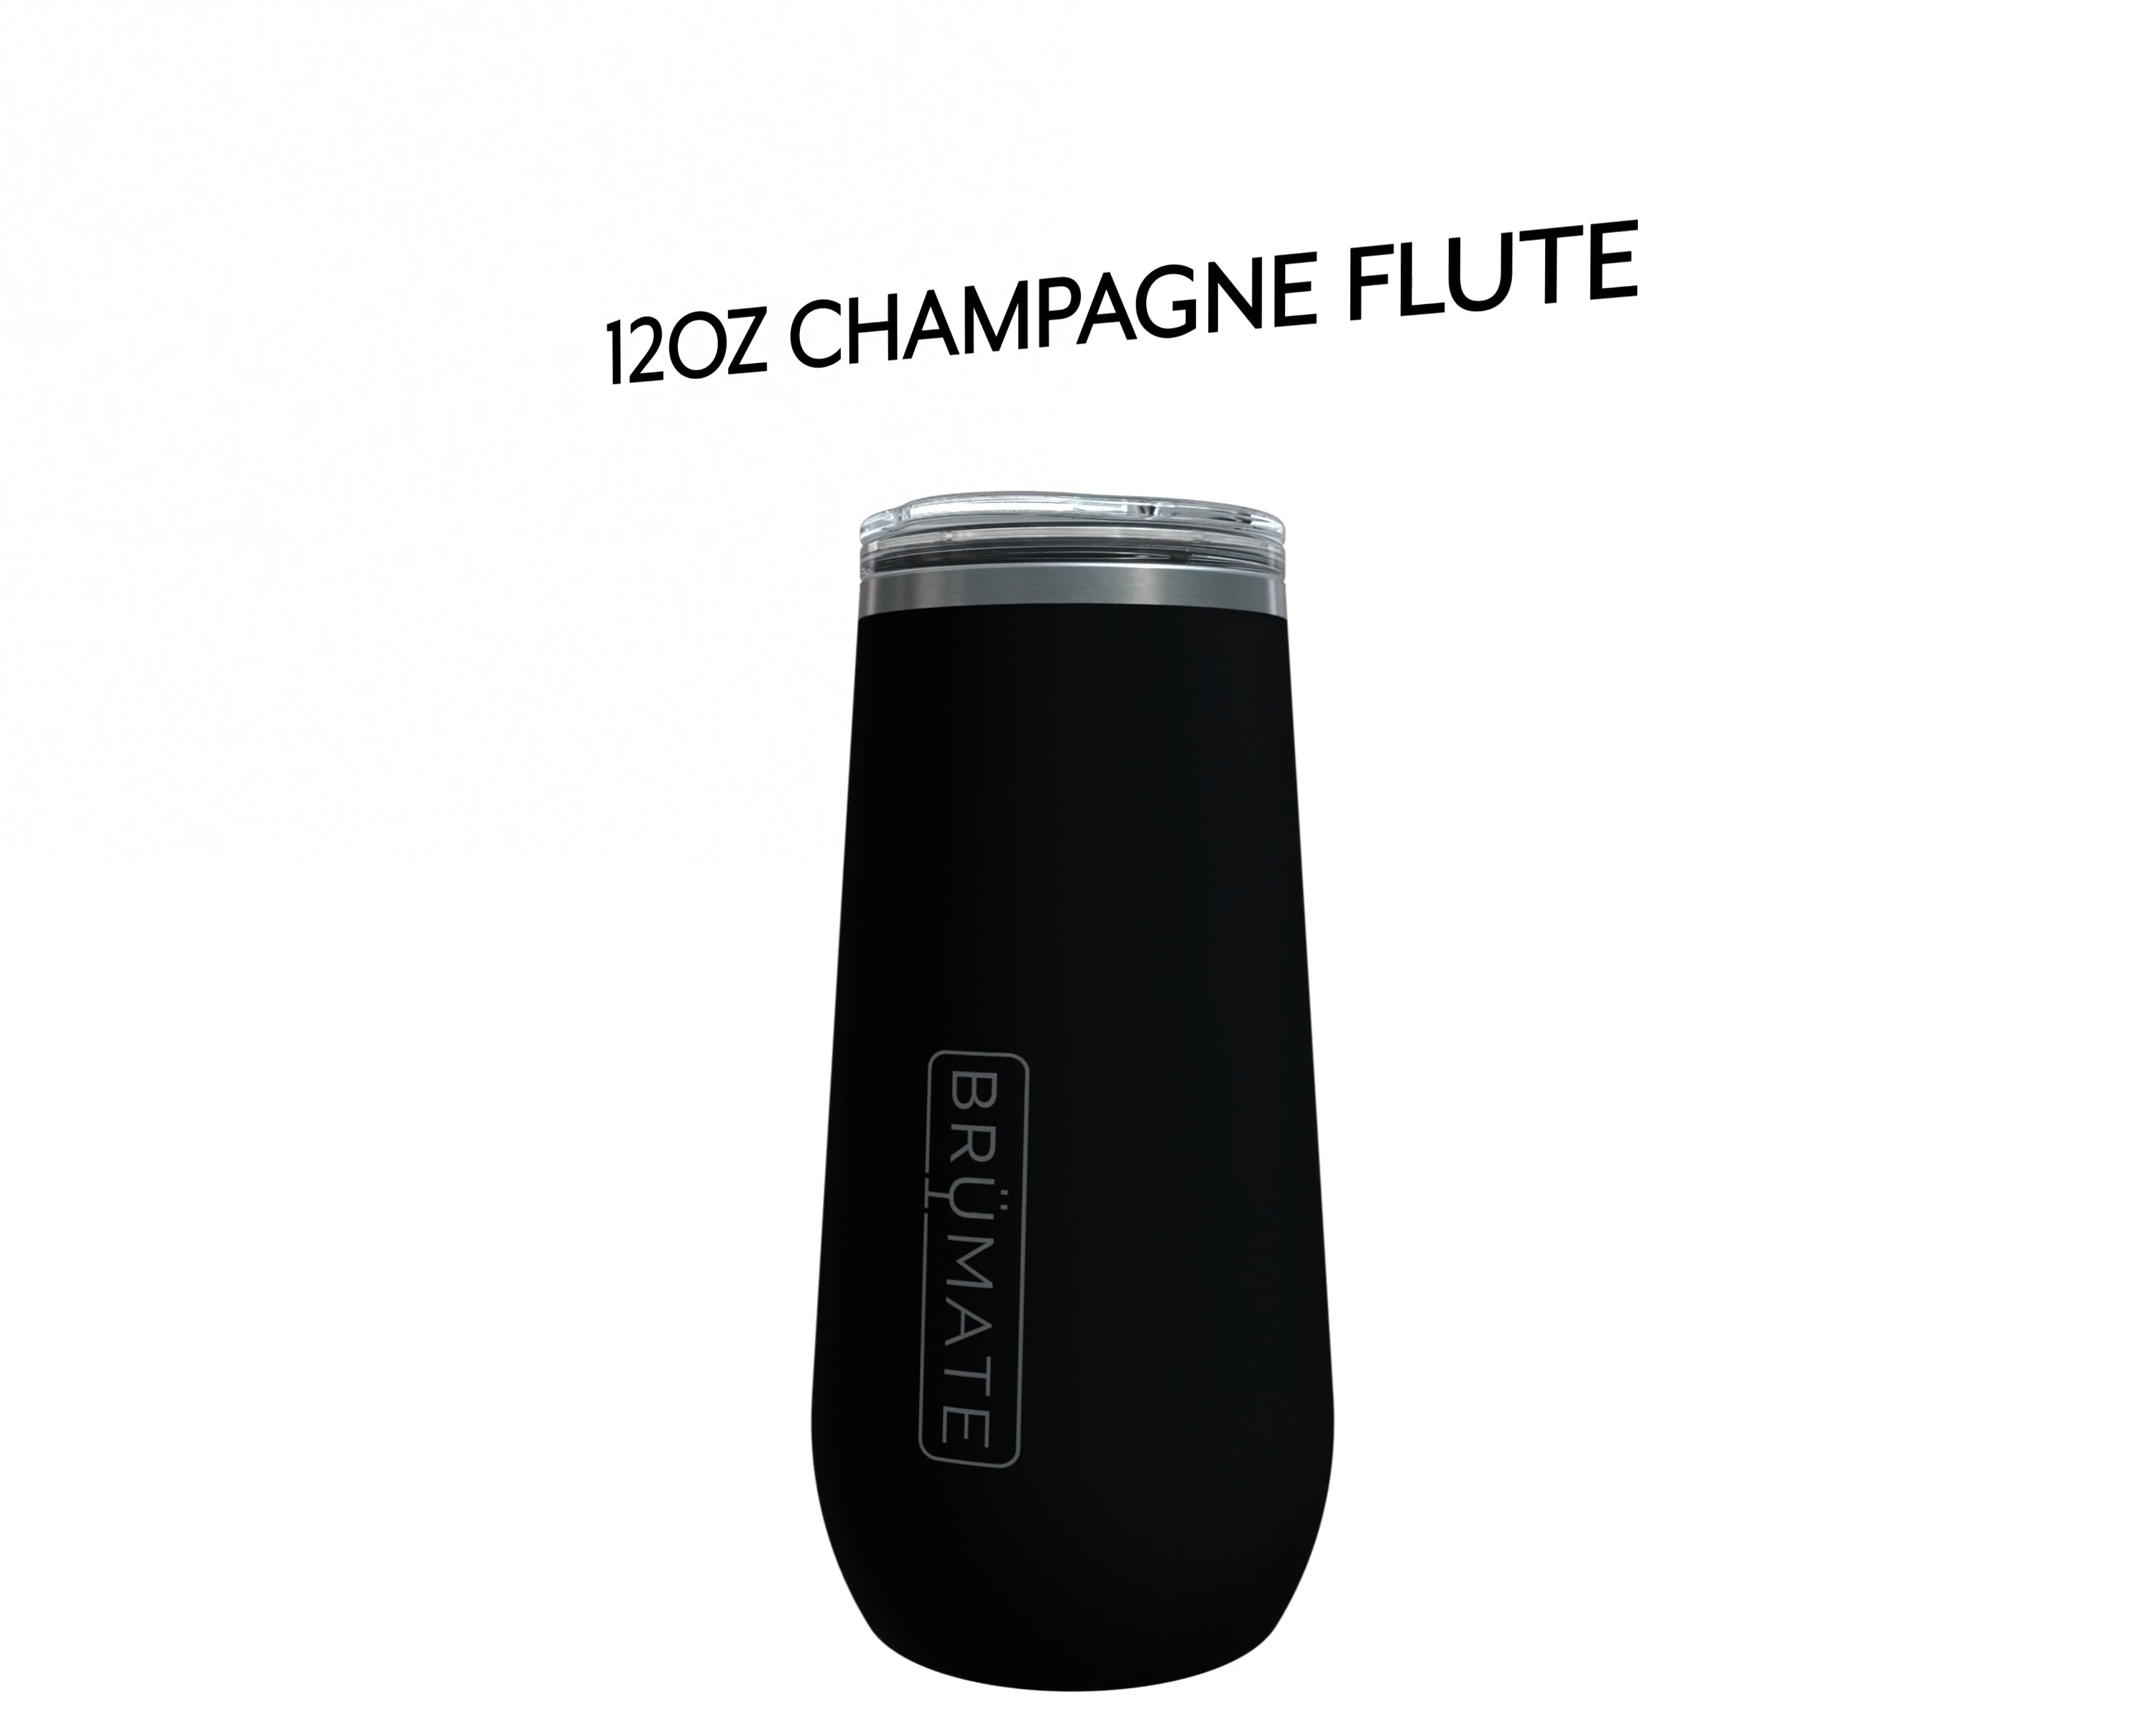 BRUMATE CHAMPAGNE FLUTE – The Buttercup Charlotte